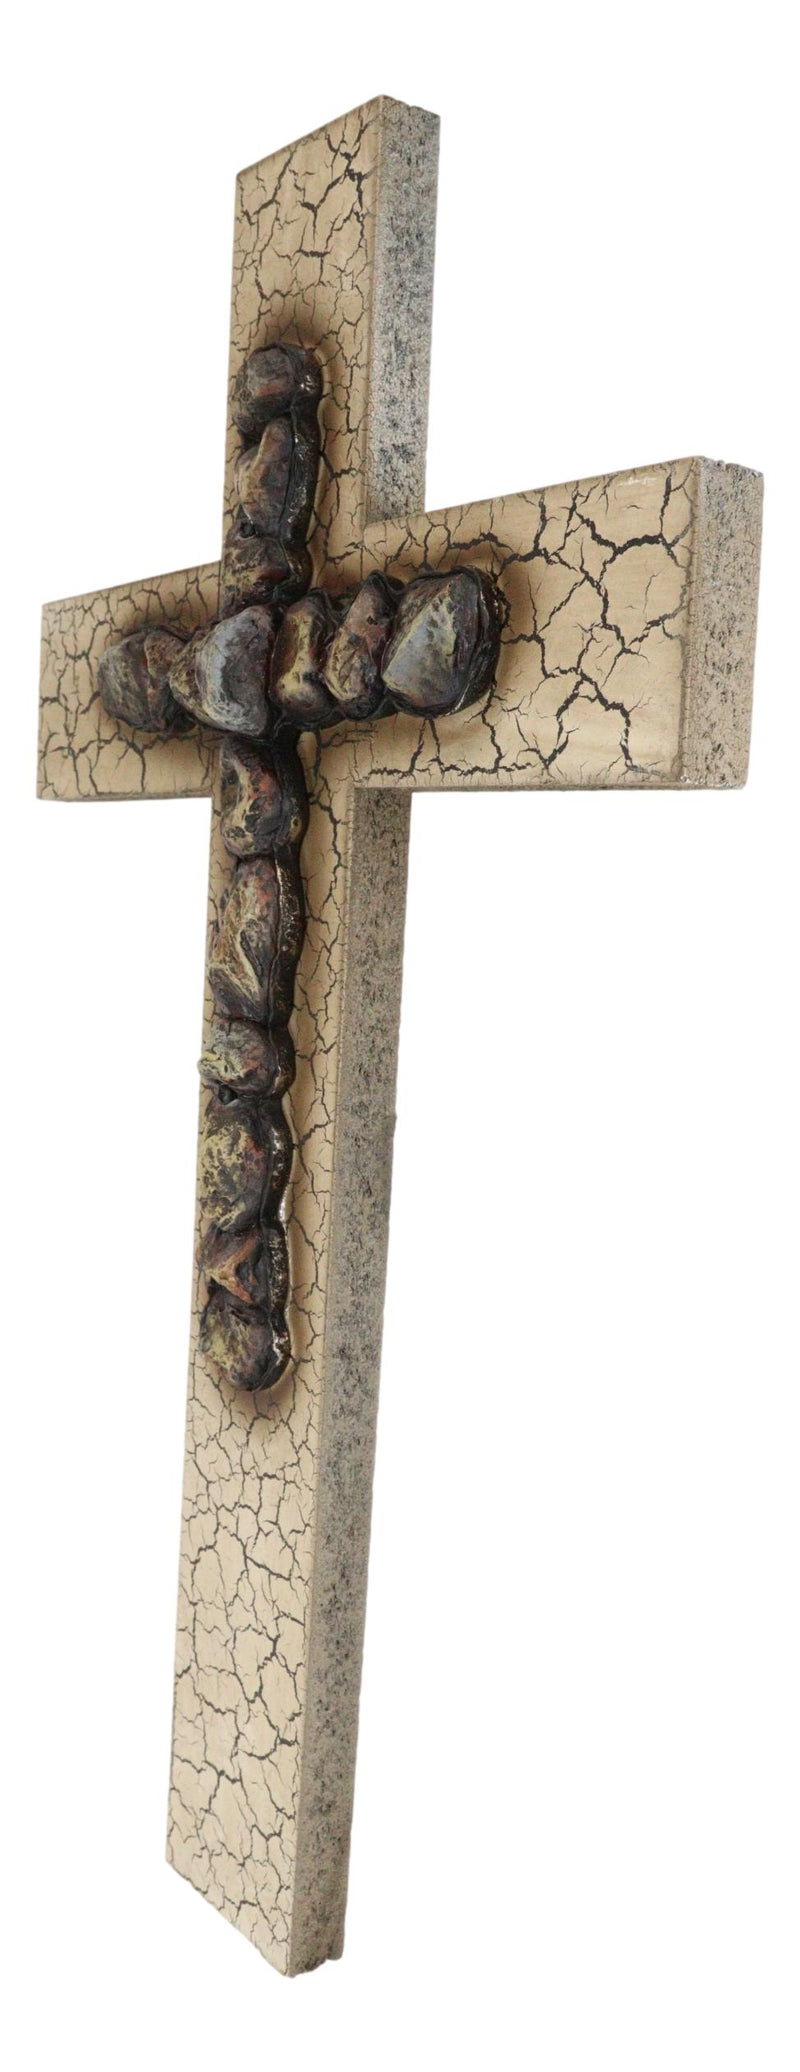 Rustic Country Western Faux Crackled Wood with Pebble Rock Stones Wall Cross